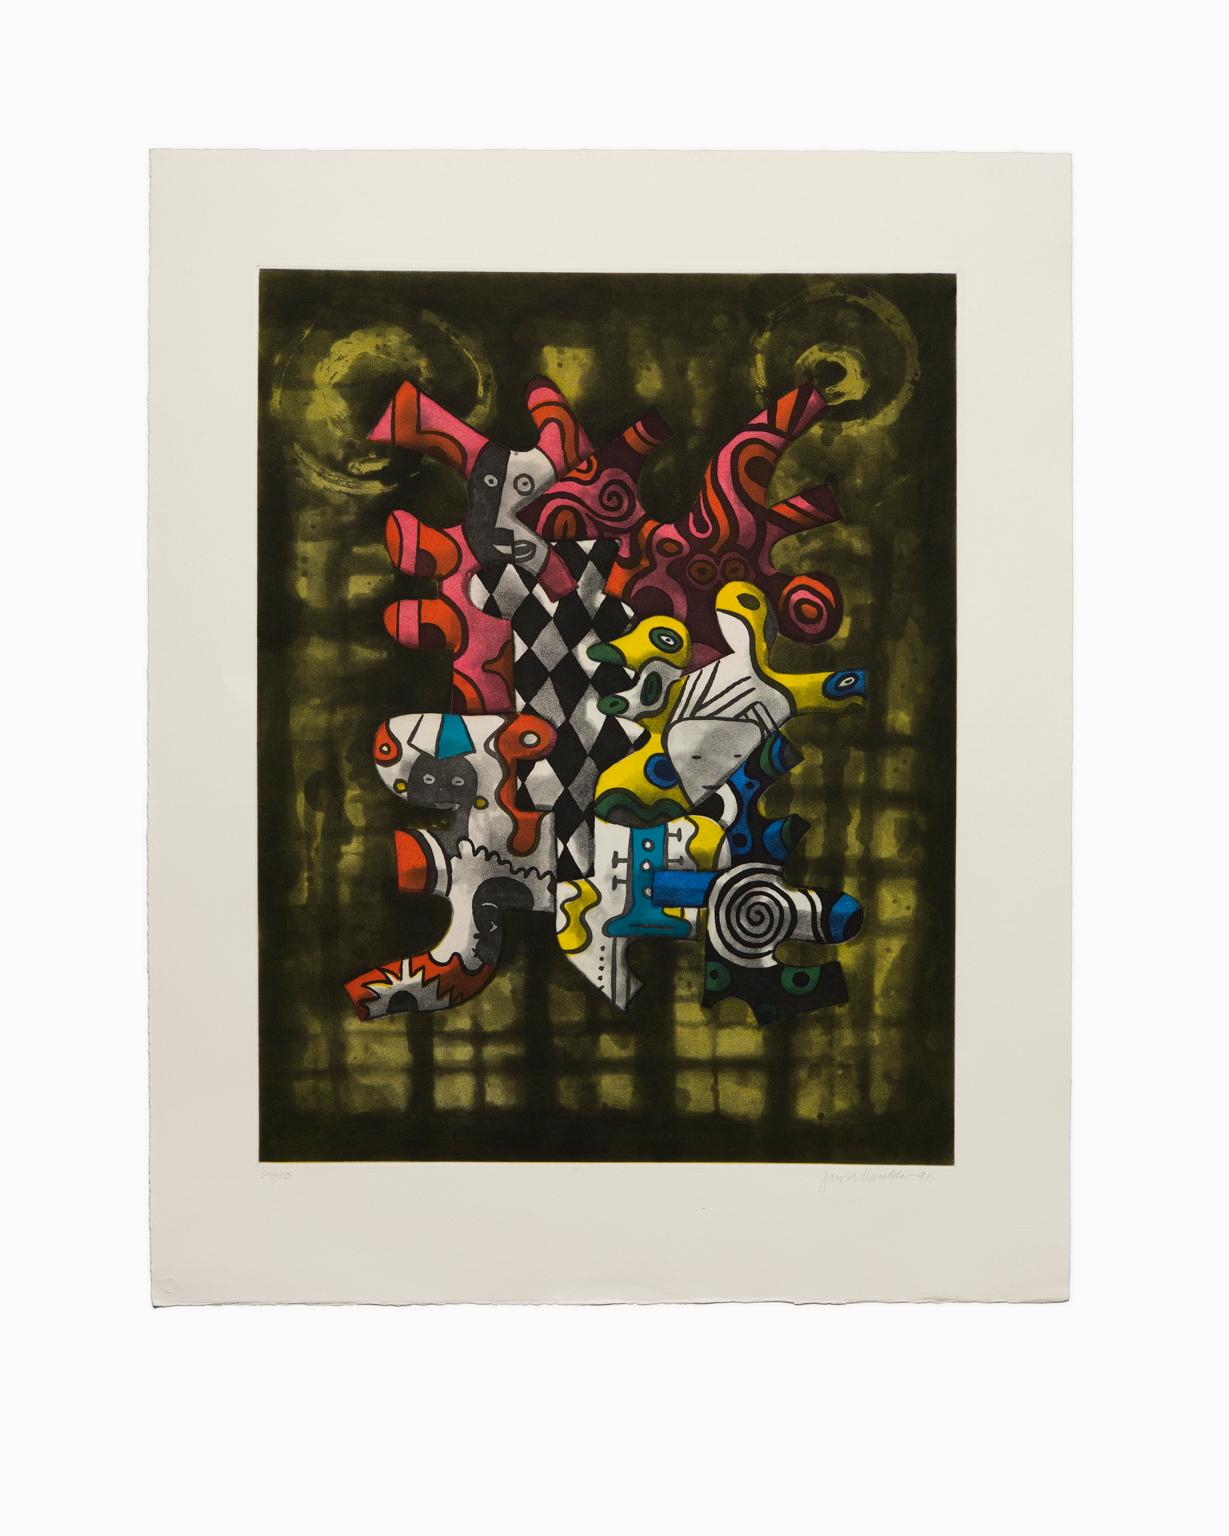 ONE WEEK ONLY SALE AT 40%

"Untitled III" is a work that displays James Hansen's intense colors and shapes of his abstract and surrealist style. This print made with etching and aquatints with hand-coloring on Arches paper pops with the illusion of